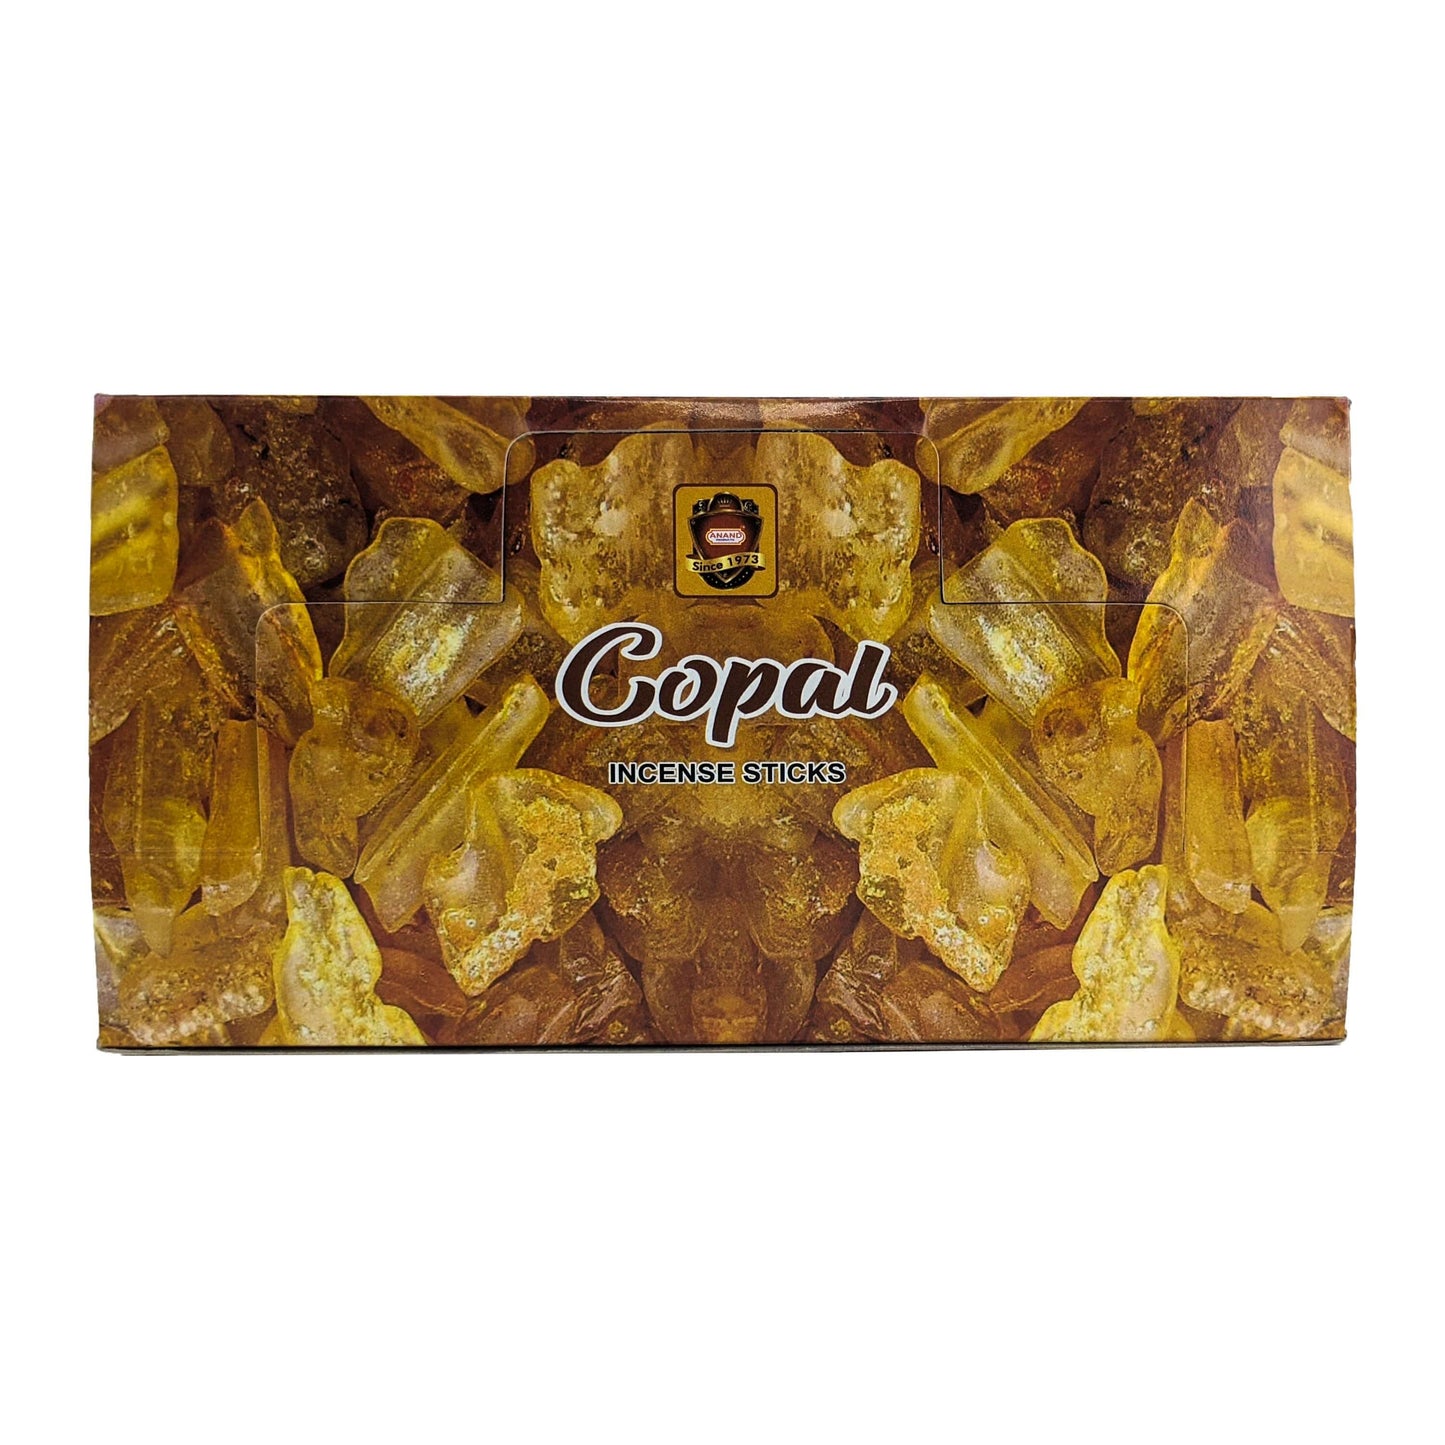 Anand Copal Incense Sticks, 15g Pack